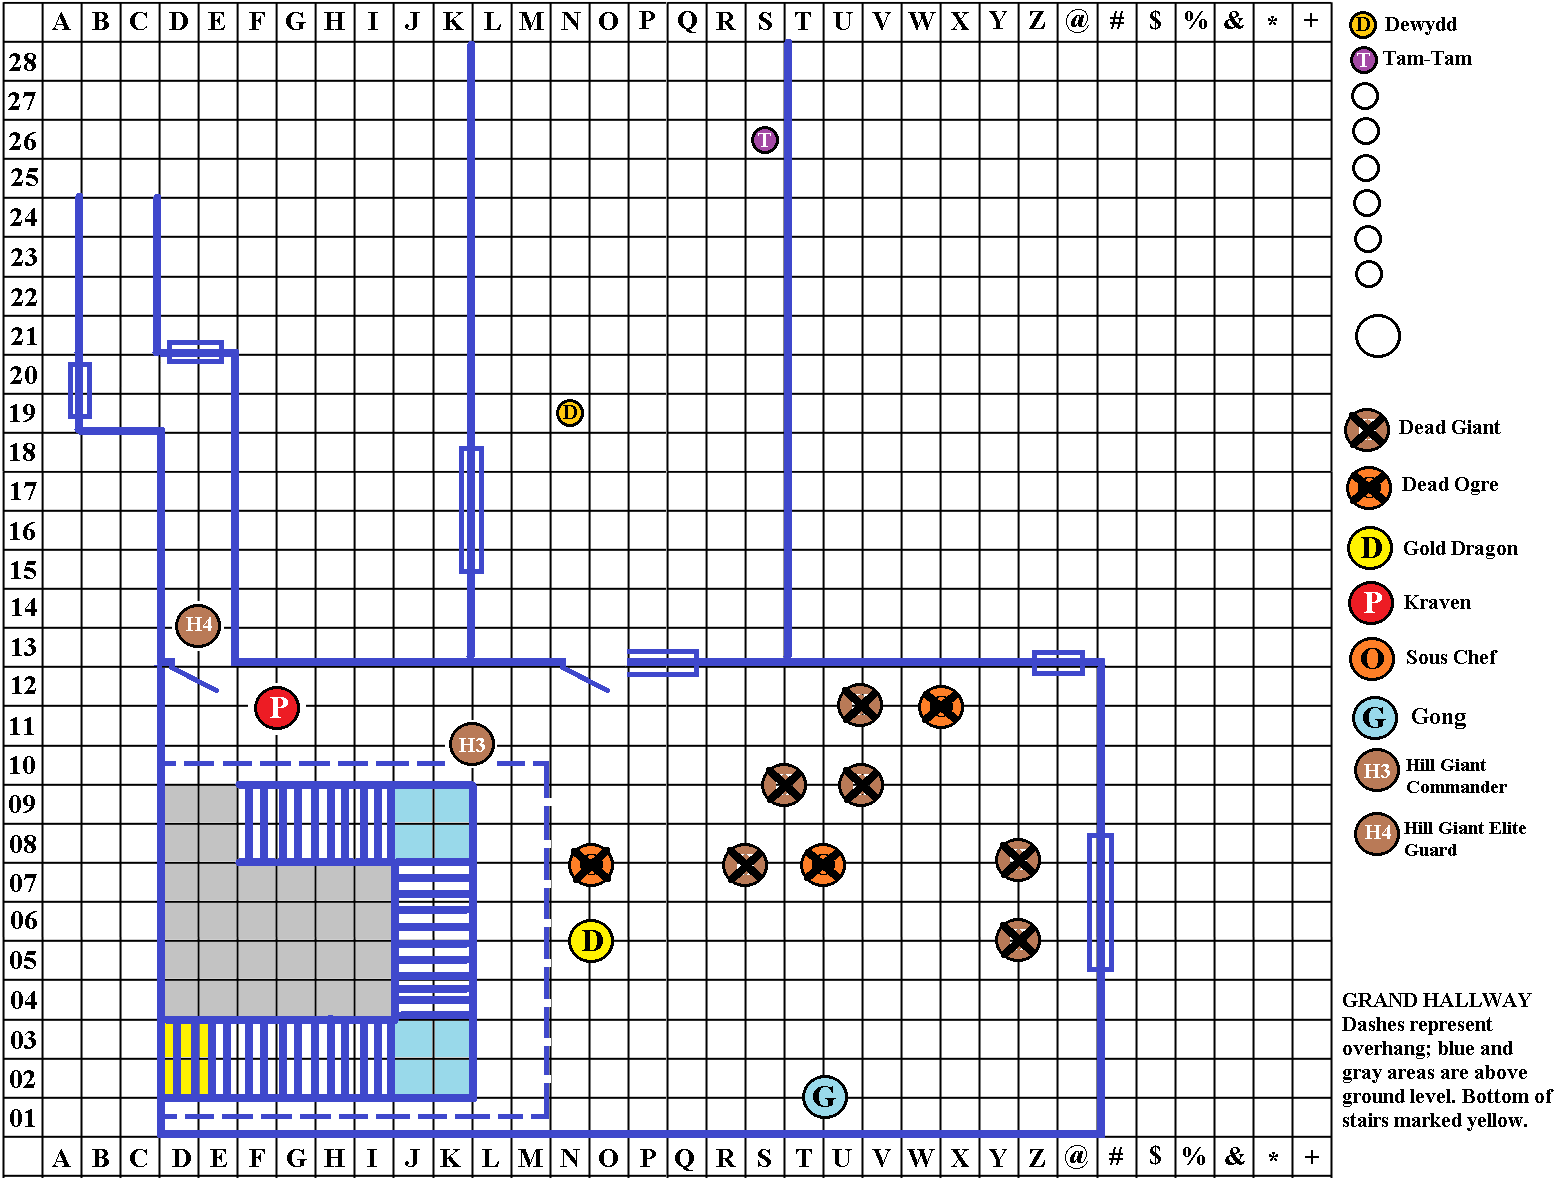 00-The-Grand-Hallway-Base-Map-01b.png